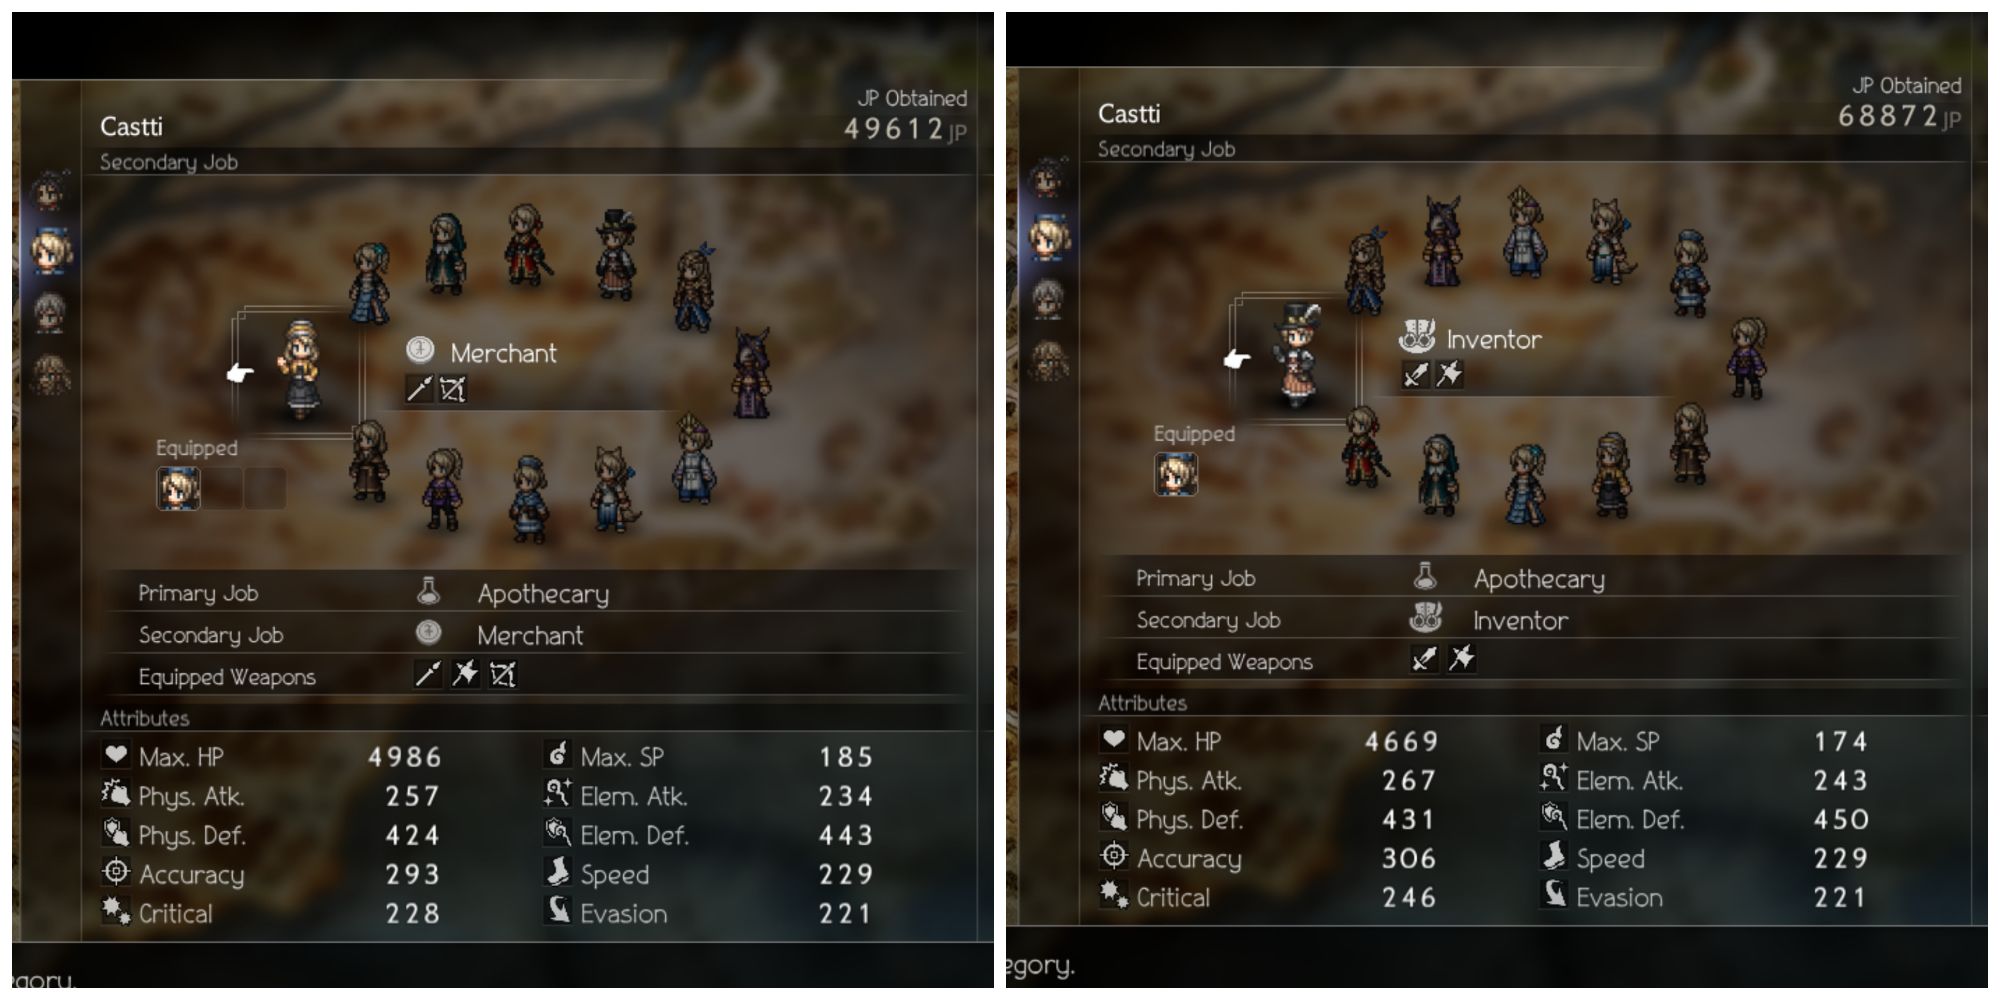 Castti'S Side Job Options In Octopath Traveler 2, Merchant And Inventor